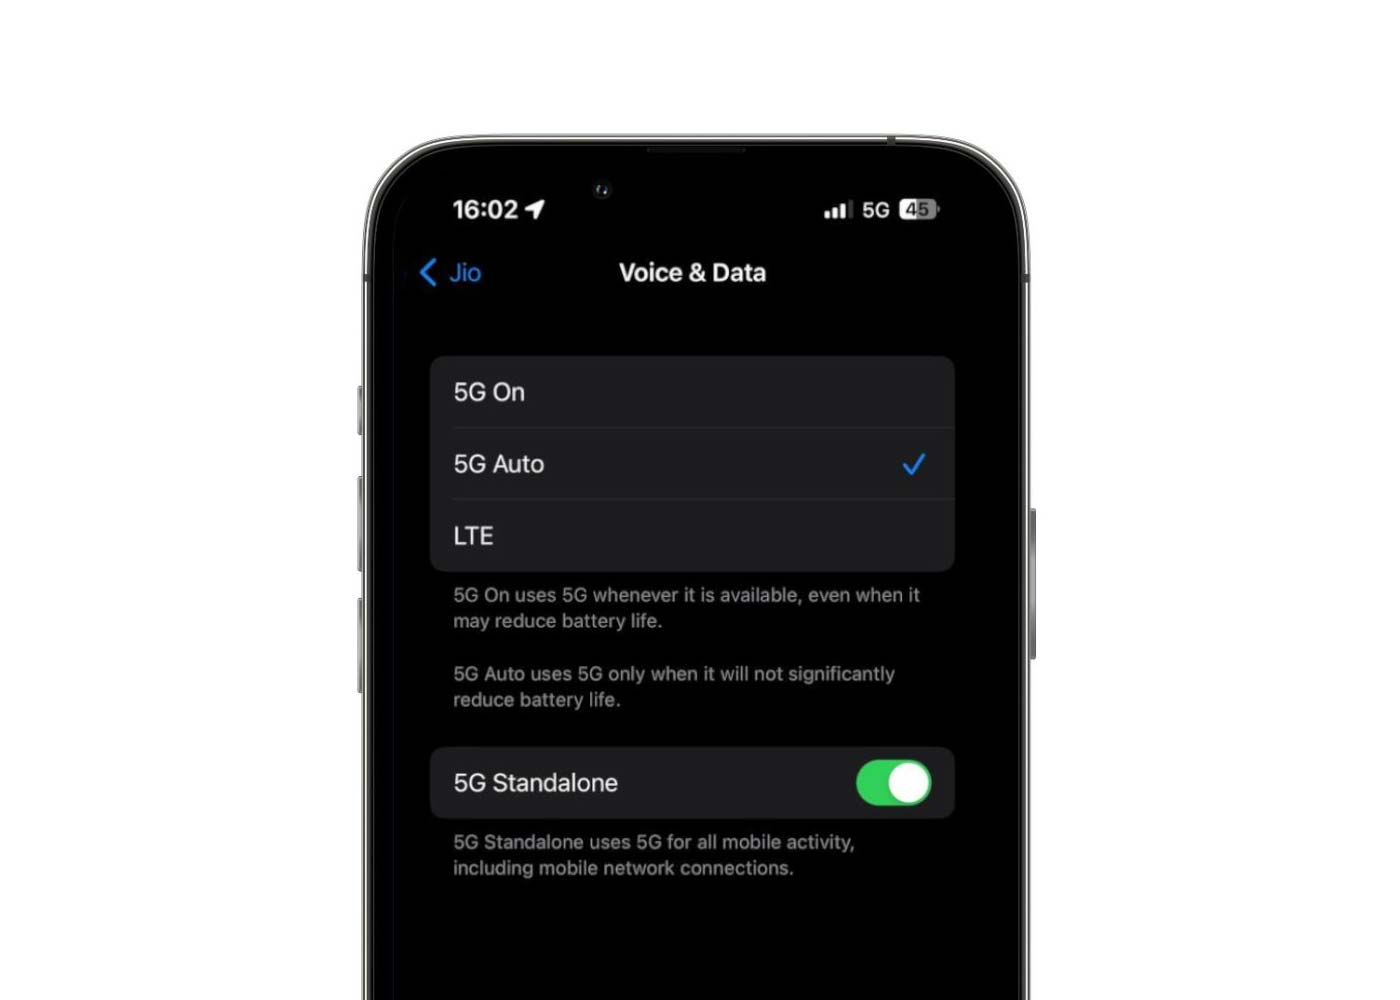 How to activate jio 5g in iPhone